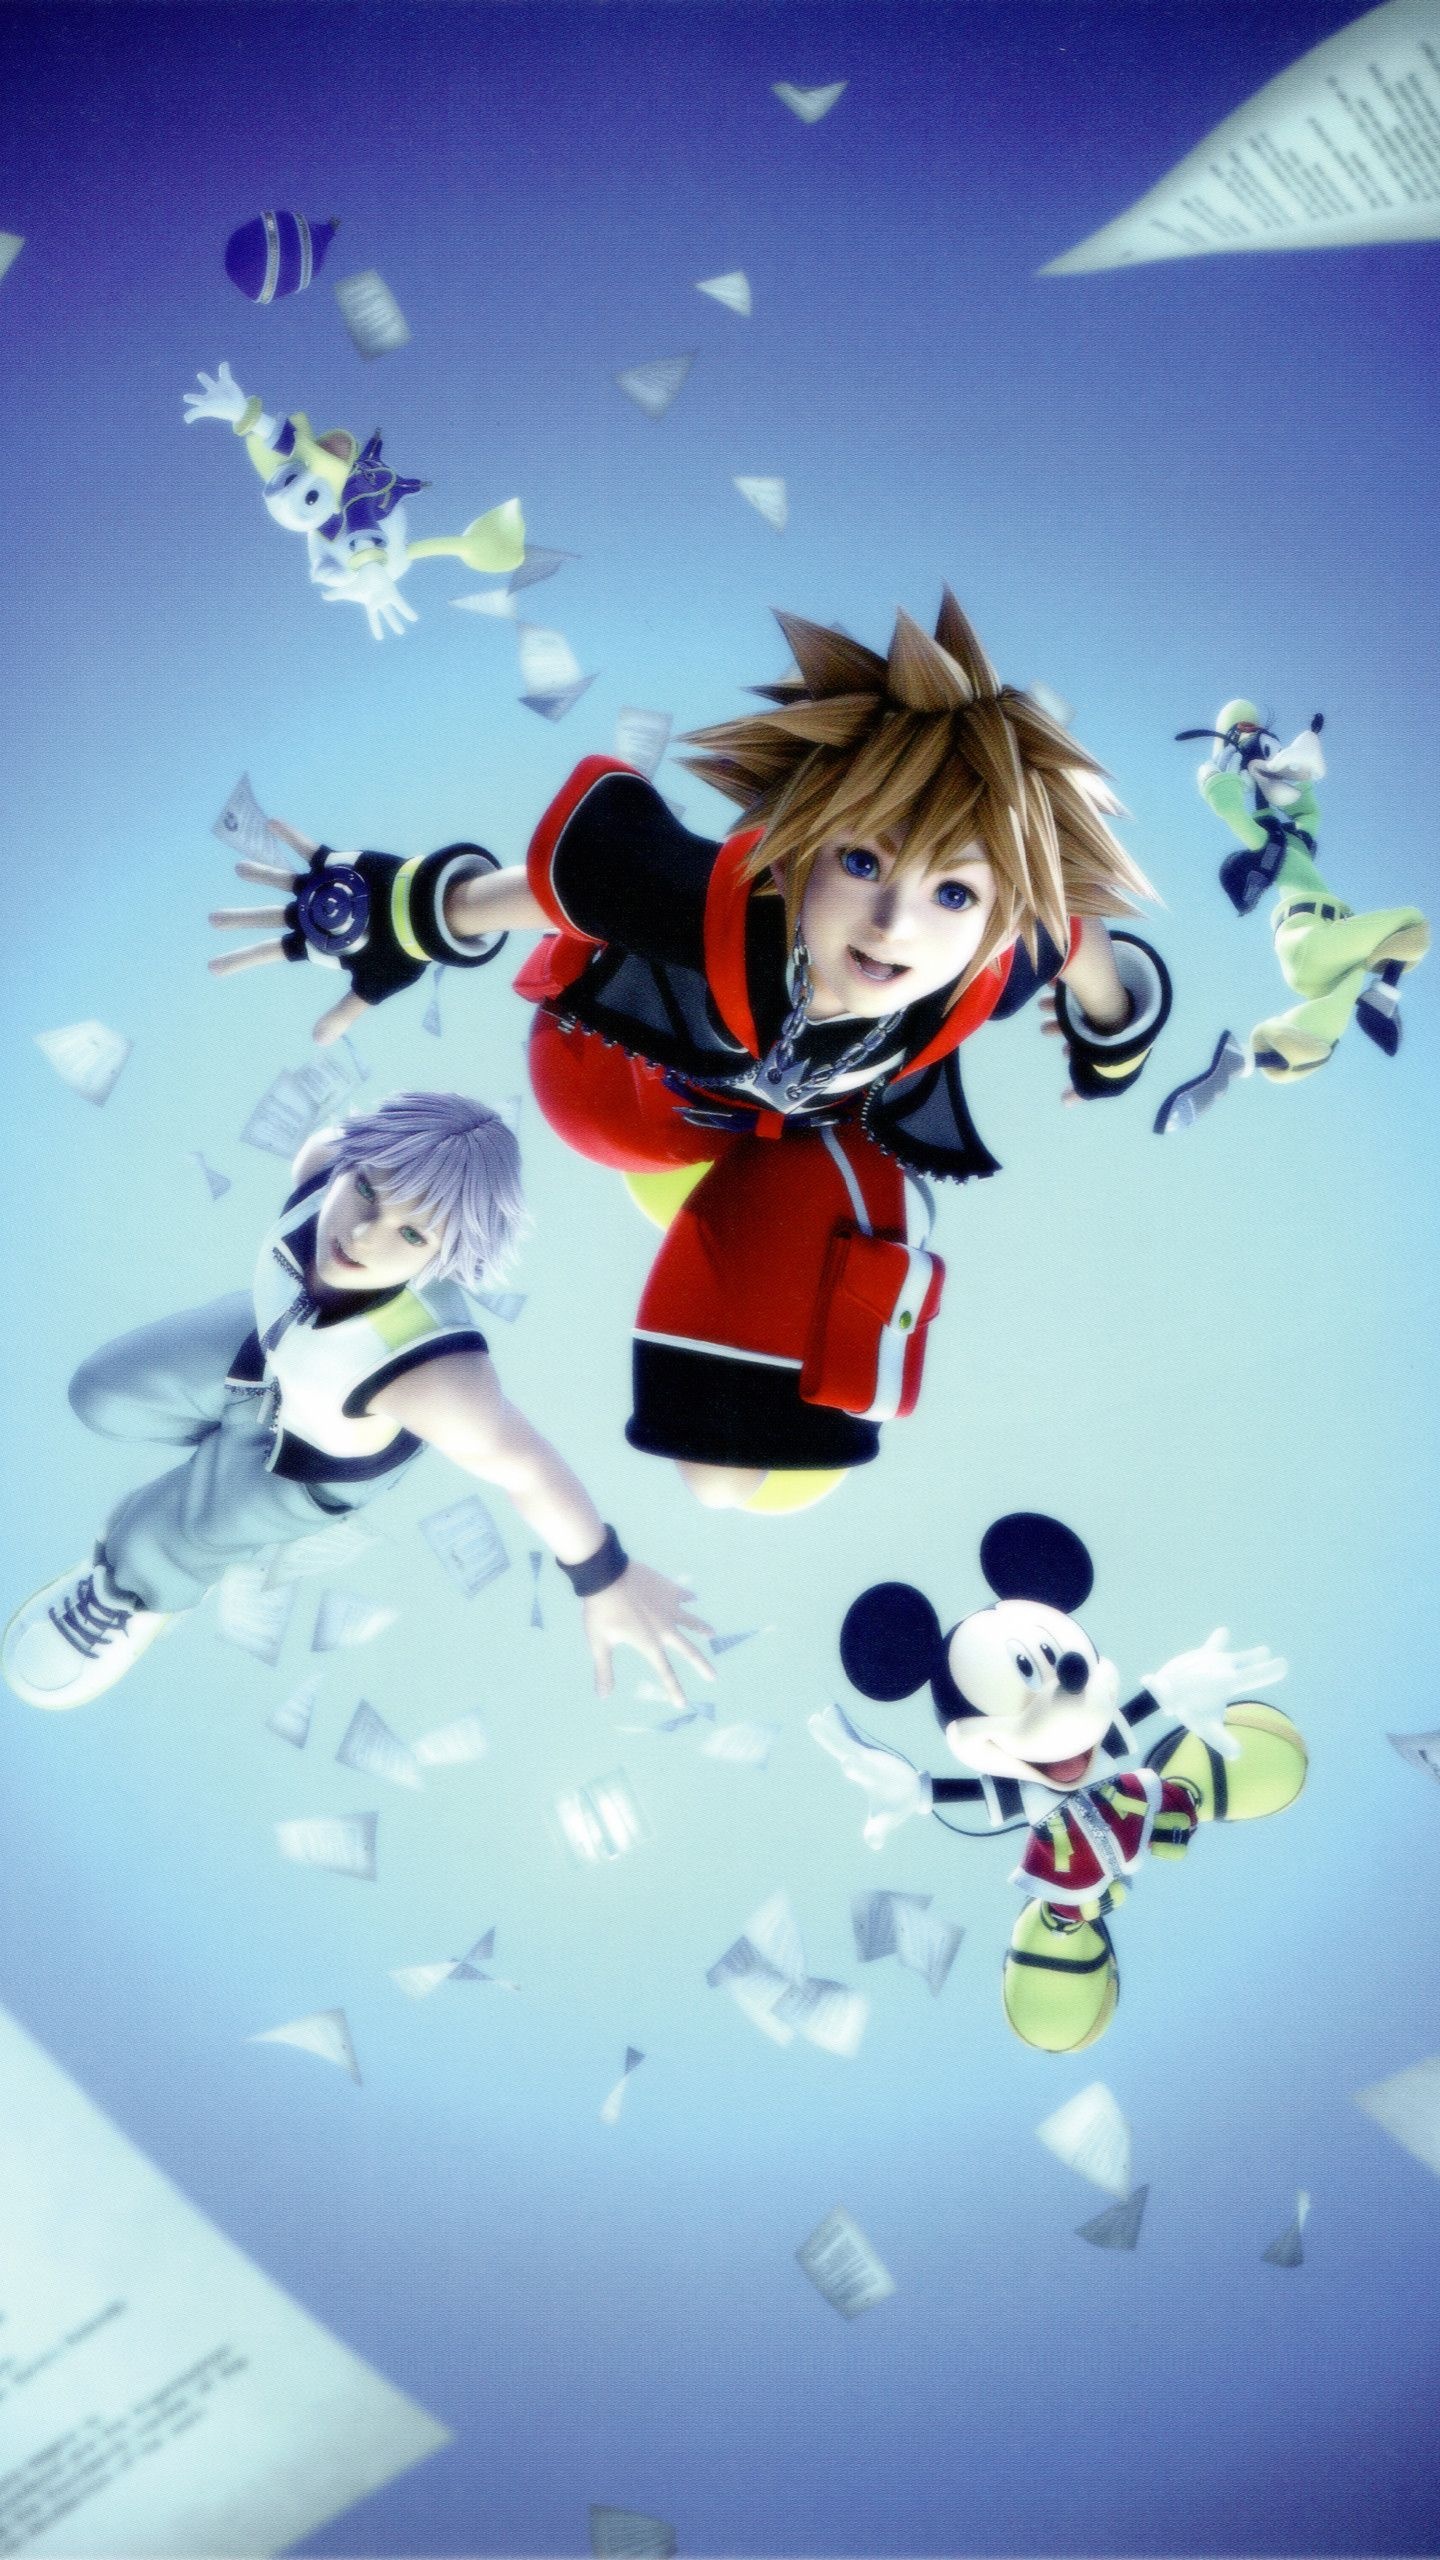 Kingdom Hearts mobile wallpapers, Sora and friends, Mobile gaming, Keyblade wielders, 1440x2560 HD Phone